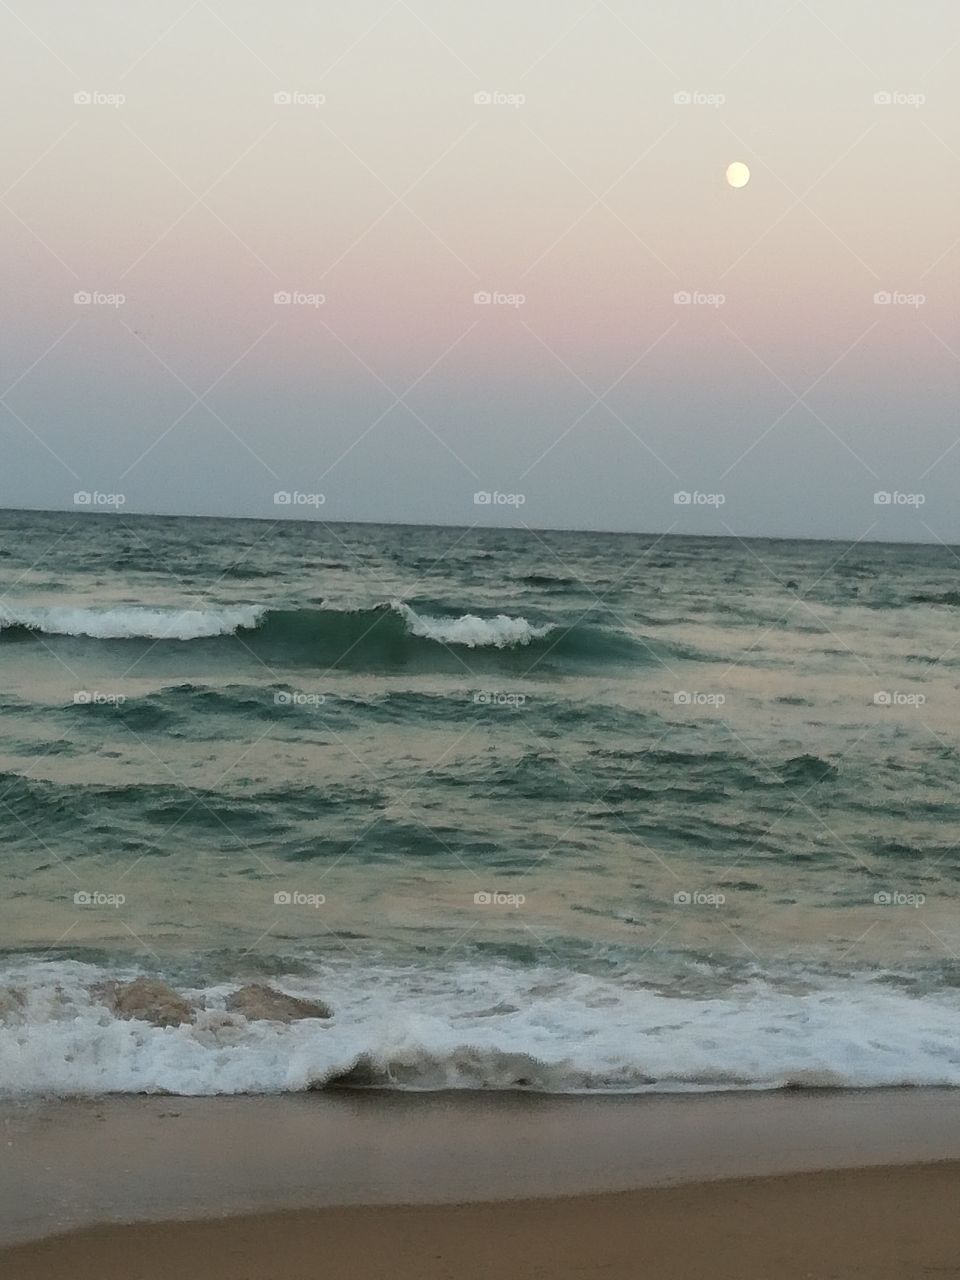 The moon shines over a stormy sea